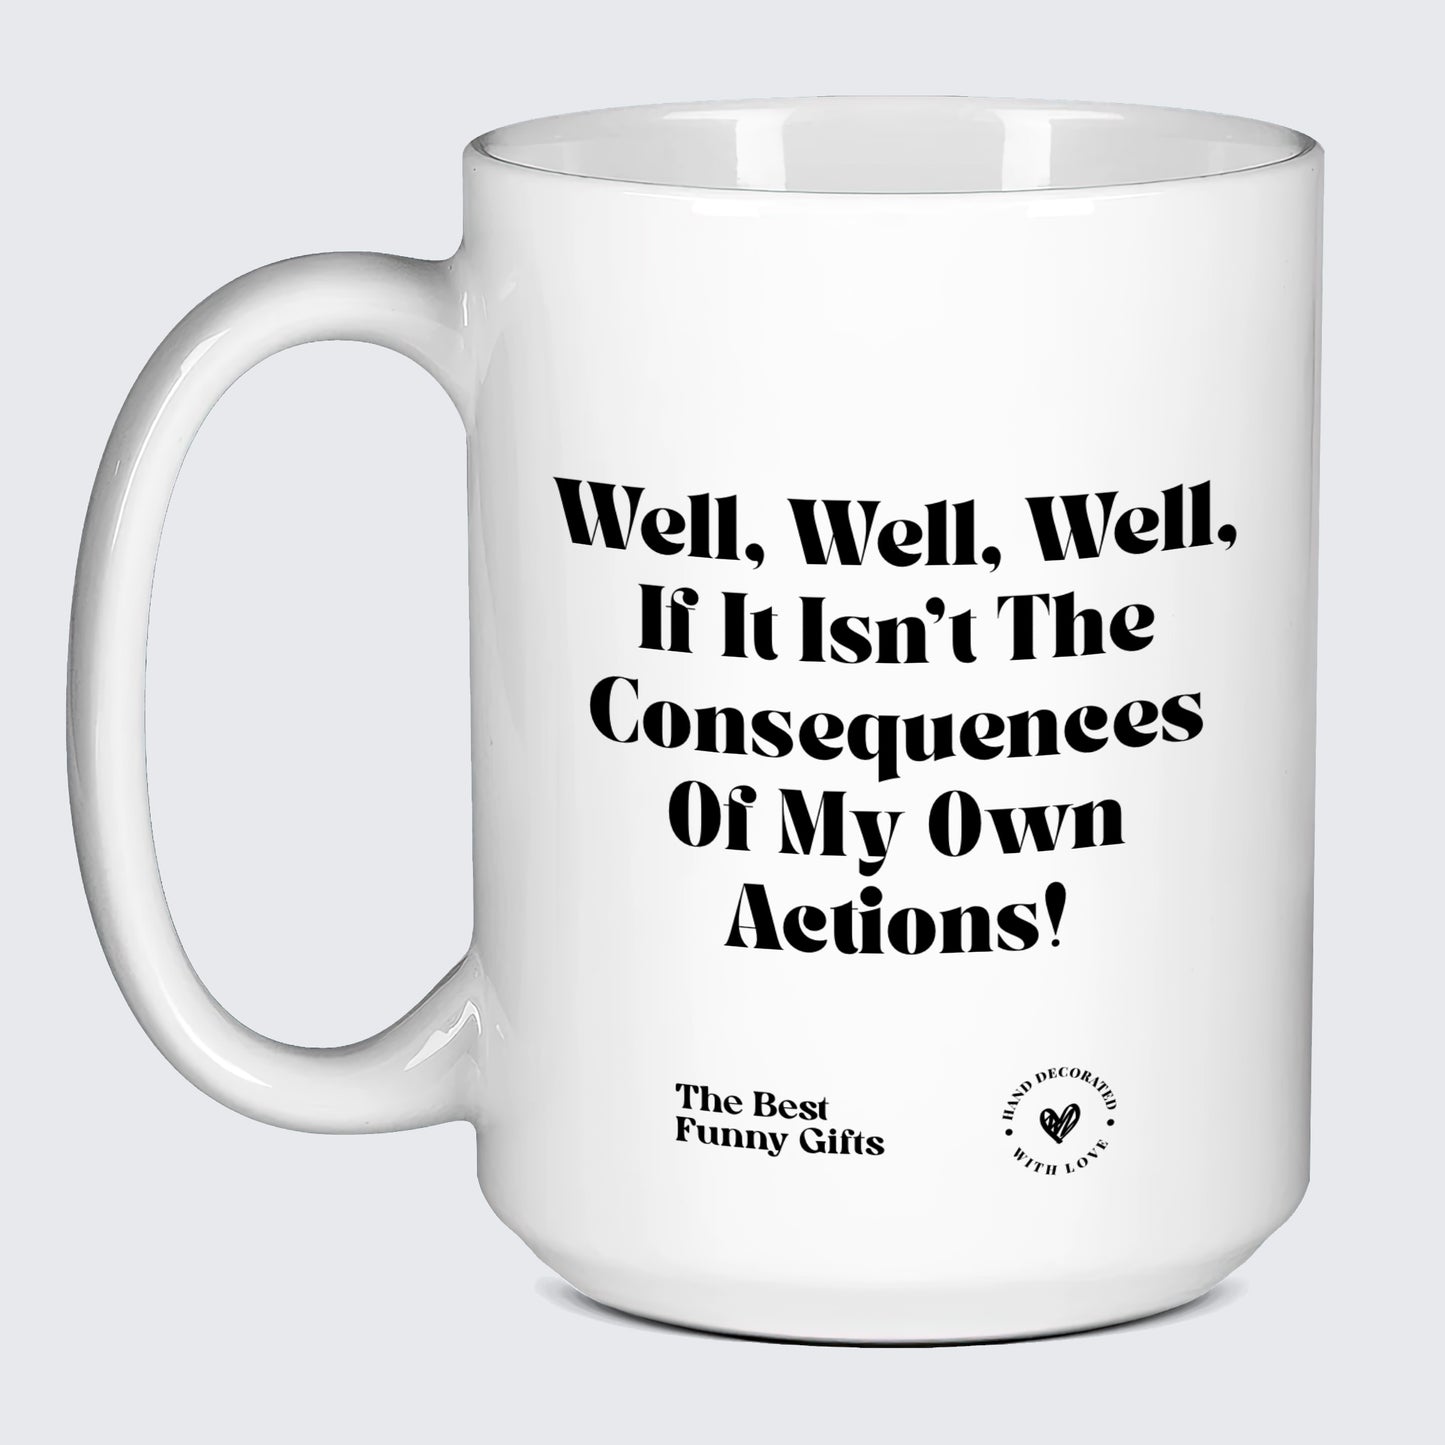 Funny Mugs - Well, Well, Well, if It Isn't the Consequences of My Own Actions! - Coffee Mug